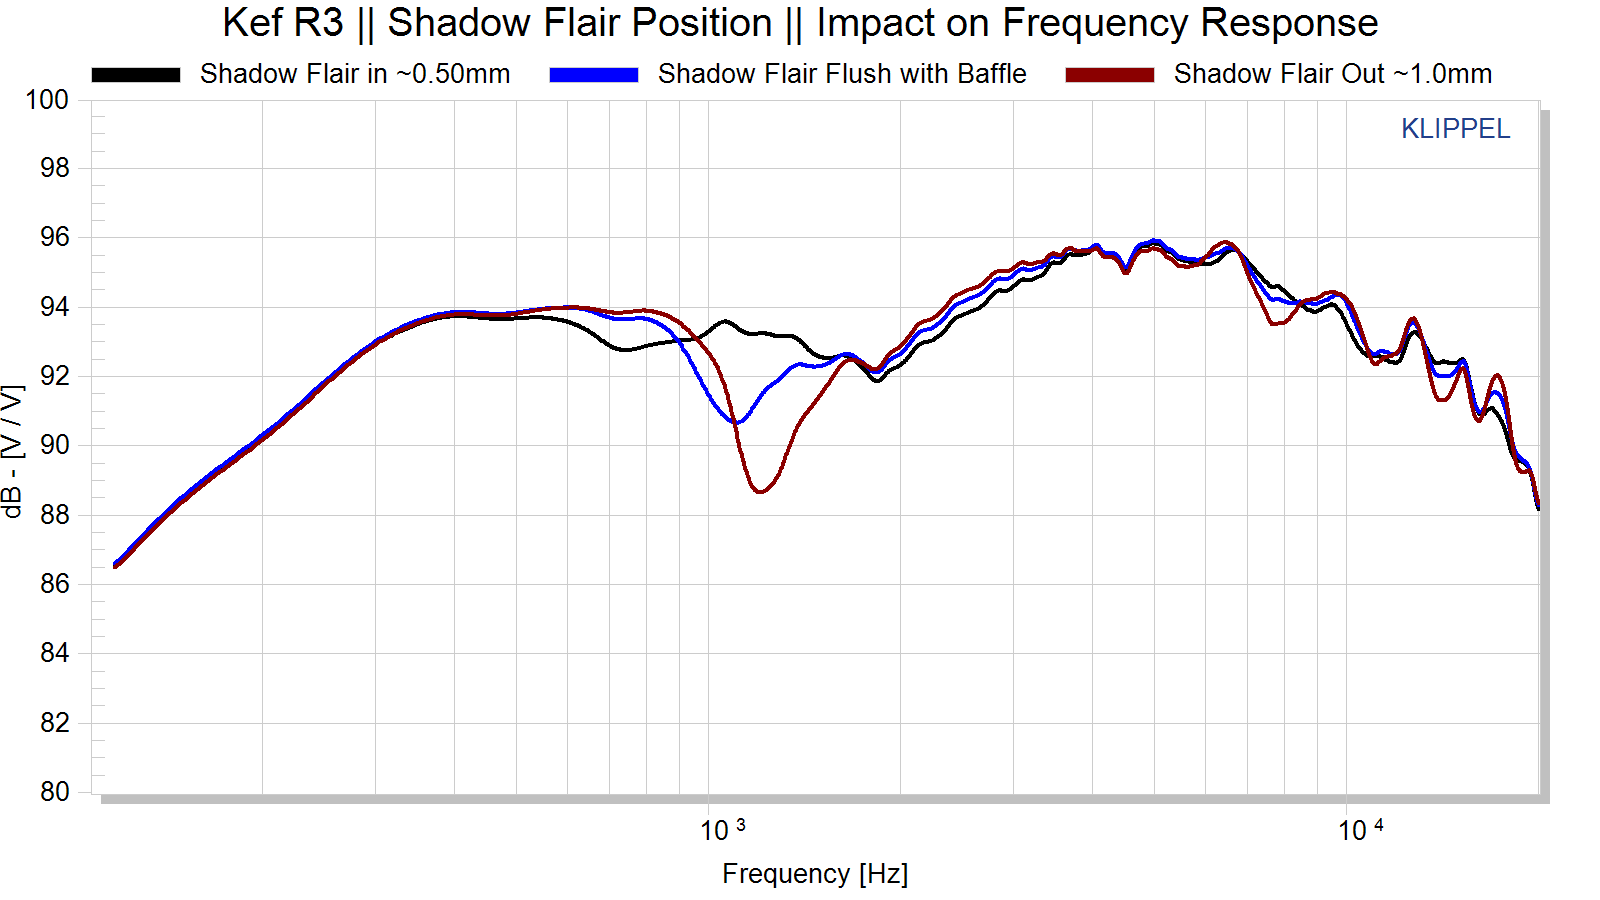 Kef R3 Response Variance per Shadow Flair Position.png